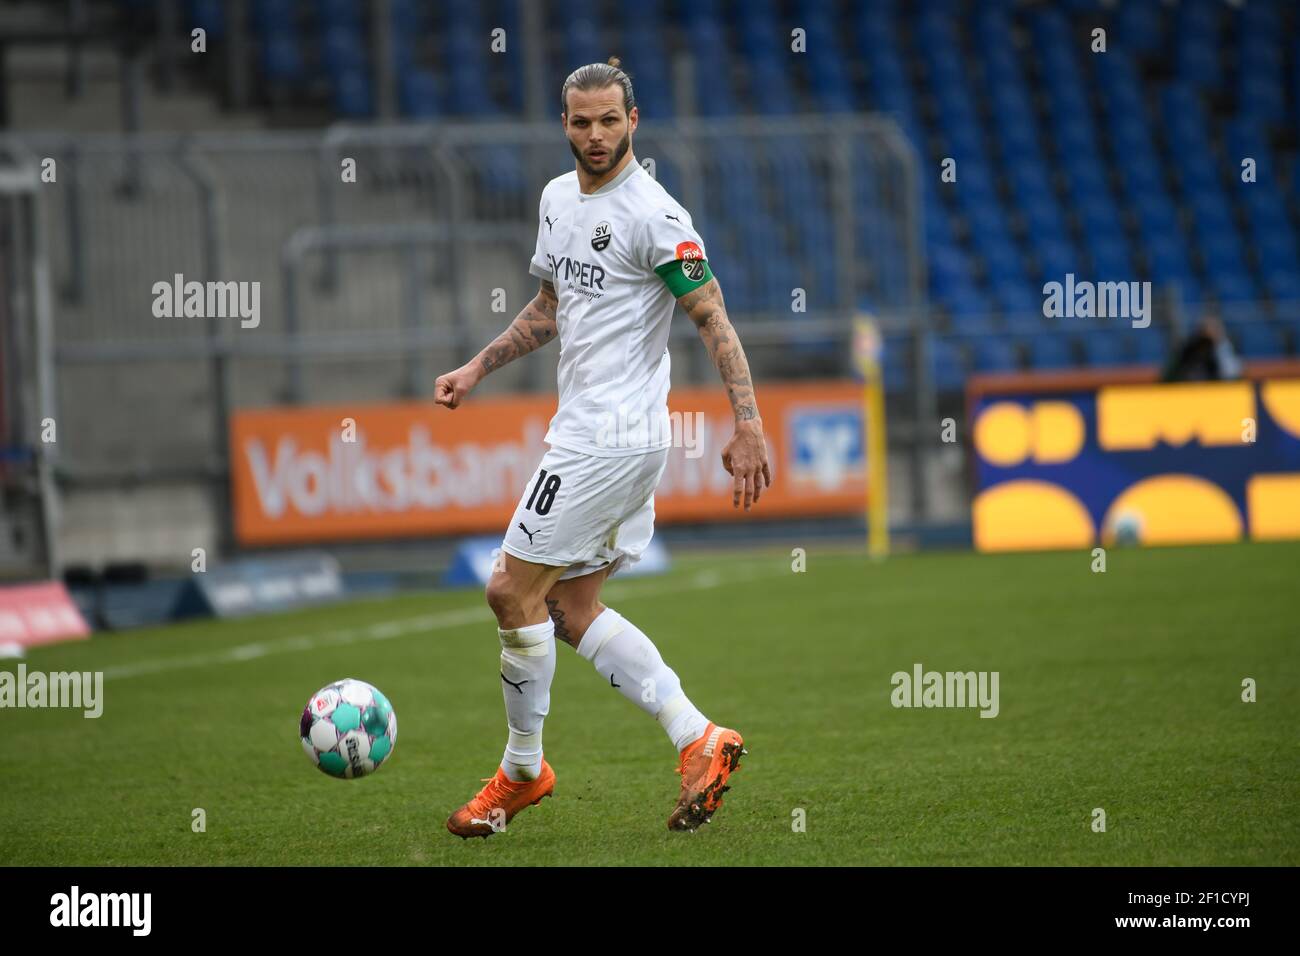 Brunswick, Germany. 07th Mar, 2021. Football: 2. Bundesliga, Eintracht Braunschweig - SV Sandhausen, Matchday 24 at Eintracht-Stadion. Sandhausen defender Dennis Diekmeier plays the ball. Credit: Swen Pförtner/dpa - IMPORTANT NOTE: In accordance with the regulations of the DFL Deutsche Fußball Liga and/or the DFB Deutscher Fußball-Bund, it is prohibited to use or have used photographs taken in the stadium and/or of the match in the form of sequence pictures and/or video-like photo series./dpa/Alamy Live News Stock Photo